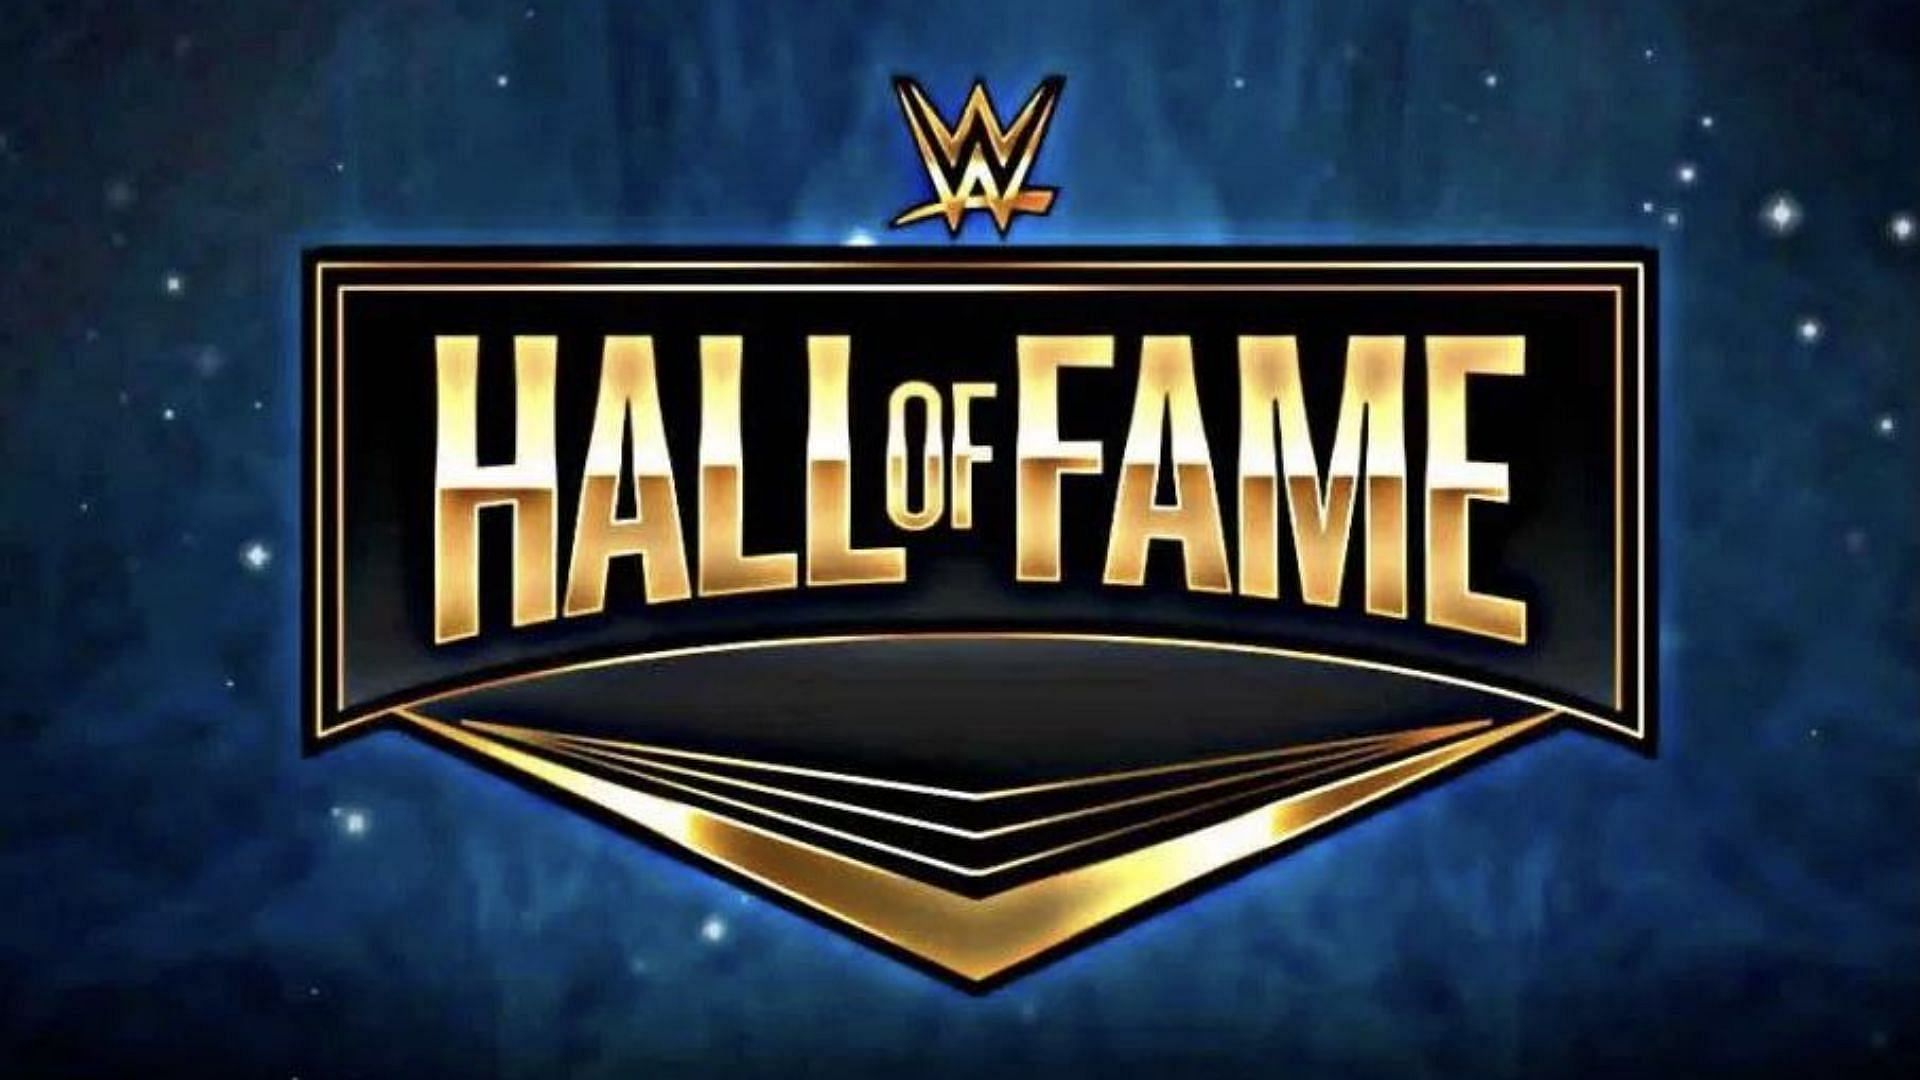 The night before WrestleMania is when the WWE Hall of Fame ceremony is held.